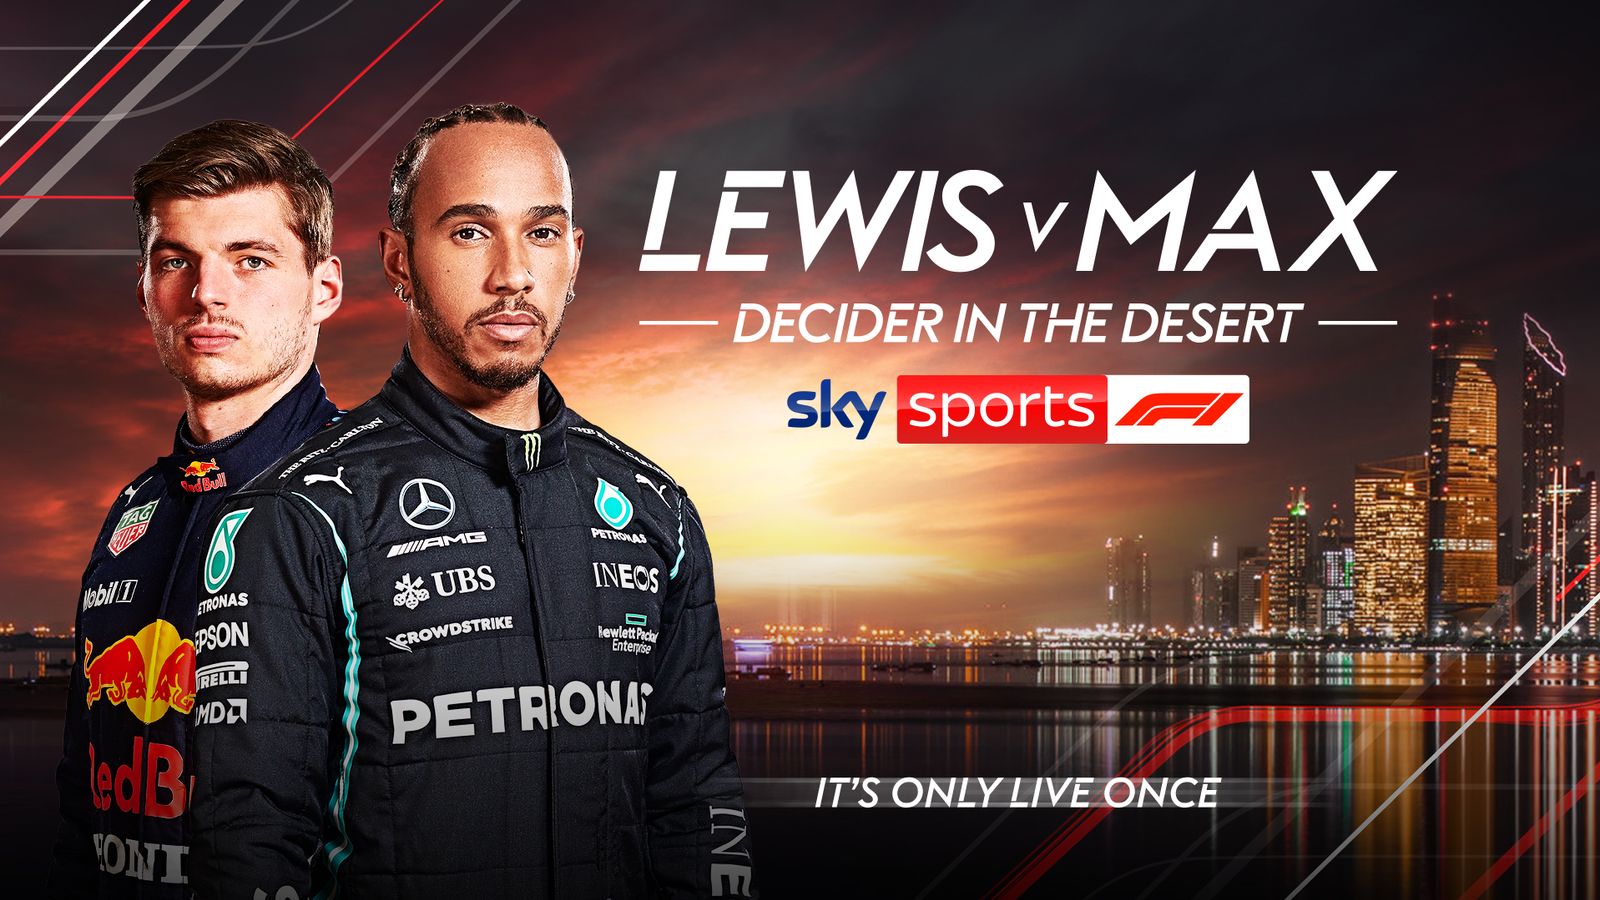 Abu Dhabi GP When to watch Lewis Hamilton vs Max Verstappens F1 title decider live on Sky Sports F1 News